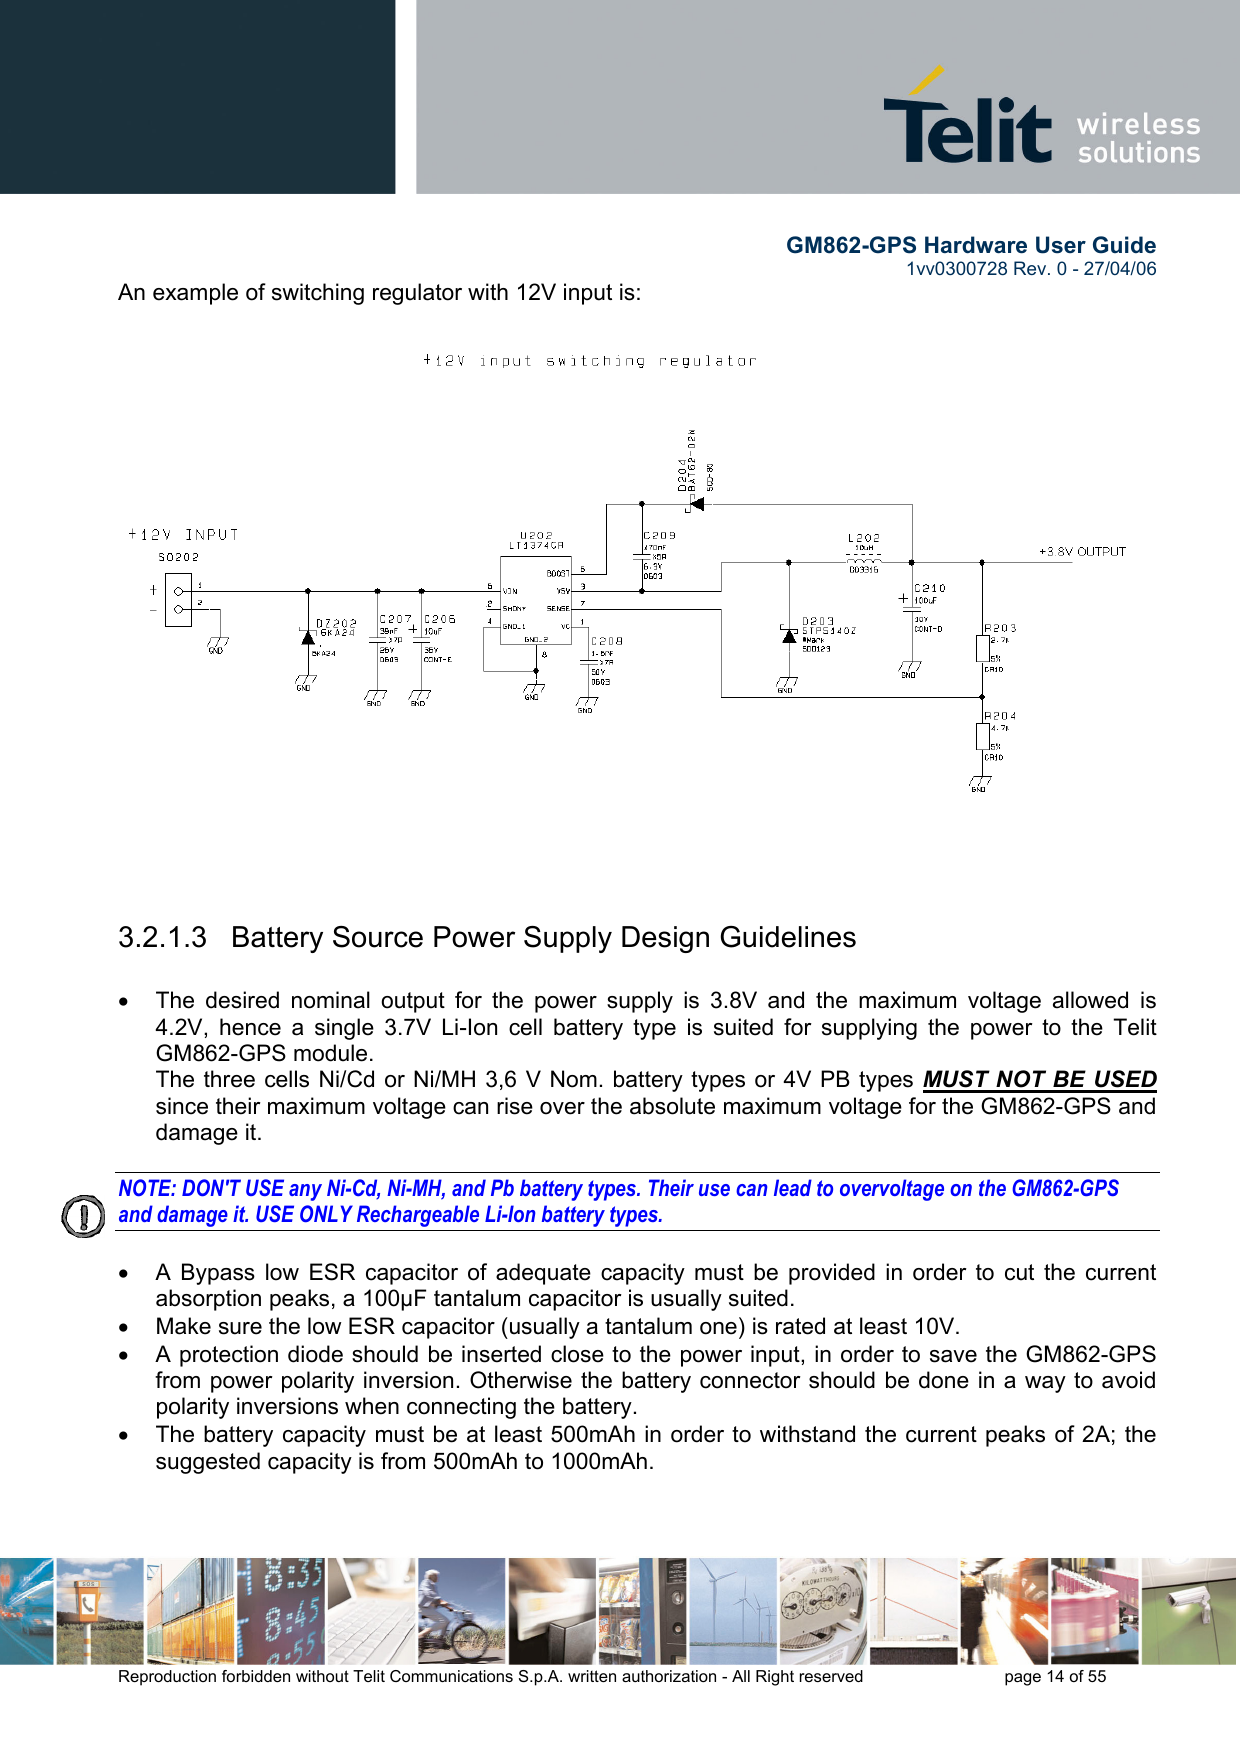        GM862-GPS Hardware User Guide   1vv0300728 Rev. 0 - 27/04/06    Reproduction forbidden without Telit Communications S.p.A. written authorization - All Right reserved    page 14 of 55  An example of switching regulator with 12V input is:  3.2.1.3   Battery Source Power Supply Design Guidelines  •  The desired nominal output for the power supply is 3.8V and the maximum voltage allowed is 4.2V, hence a single 3.7V Li-Ion cell battery type is suited for supplying the power to the Telit GM862-GPS module. The three cells Ni/Cd or Ni/MH 3,6 V Nom. battery types or 4V PB types MUST NOT BE USED since their maximum voltage can rise over the absolute maximum voltage for the GM862-GPS and damage it.  NOTE: DON&apos;T USE any Ni-Cd, Ni-MH, and Pb battery types. Their use can lead to overvoltage on the GM862-GPS and damage it. USE ONLY Rechargeable Li-Ion battery types.  •  A Bypass low ESR capacitor of adequate capacity must be provided in order to cut the current absorption peaks, a 100μF tantalum capacitor is usually suited. •  Make sure the low ESR capacitor (usually a tantalum one) is rated at least 10V. •  A protection diode should be inserted close to the power input, in order to save the GM862-GPS from power polarity inversion. Otherwise the battery connector should be done in a way to avoid polarity inversions when connecting the battery. •  The battery capacity must be at least 500mAh in order to withstand the current peaks of 2A; the suggested capacity is from 500mAh to 1000mAh.  